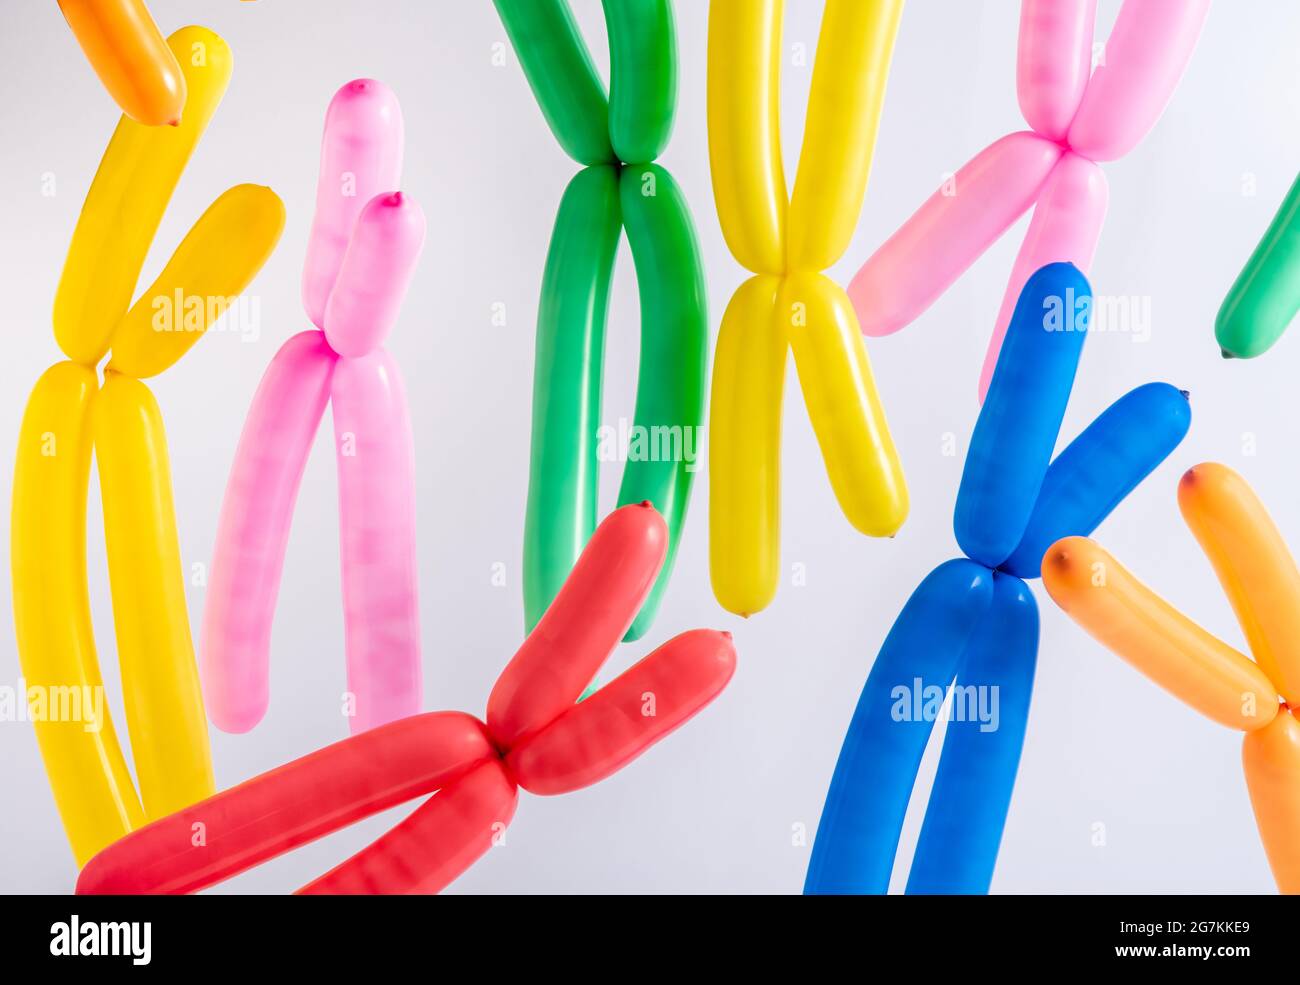 Multicolored modeling balloons as x chromosomes on white background. Scientific concept. Rectangle layout. Stock Photo